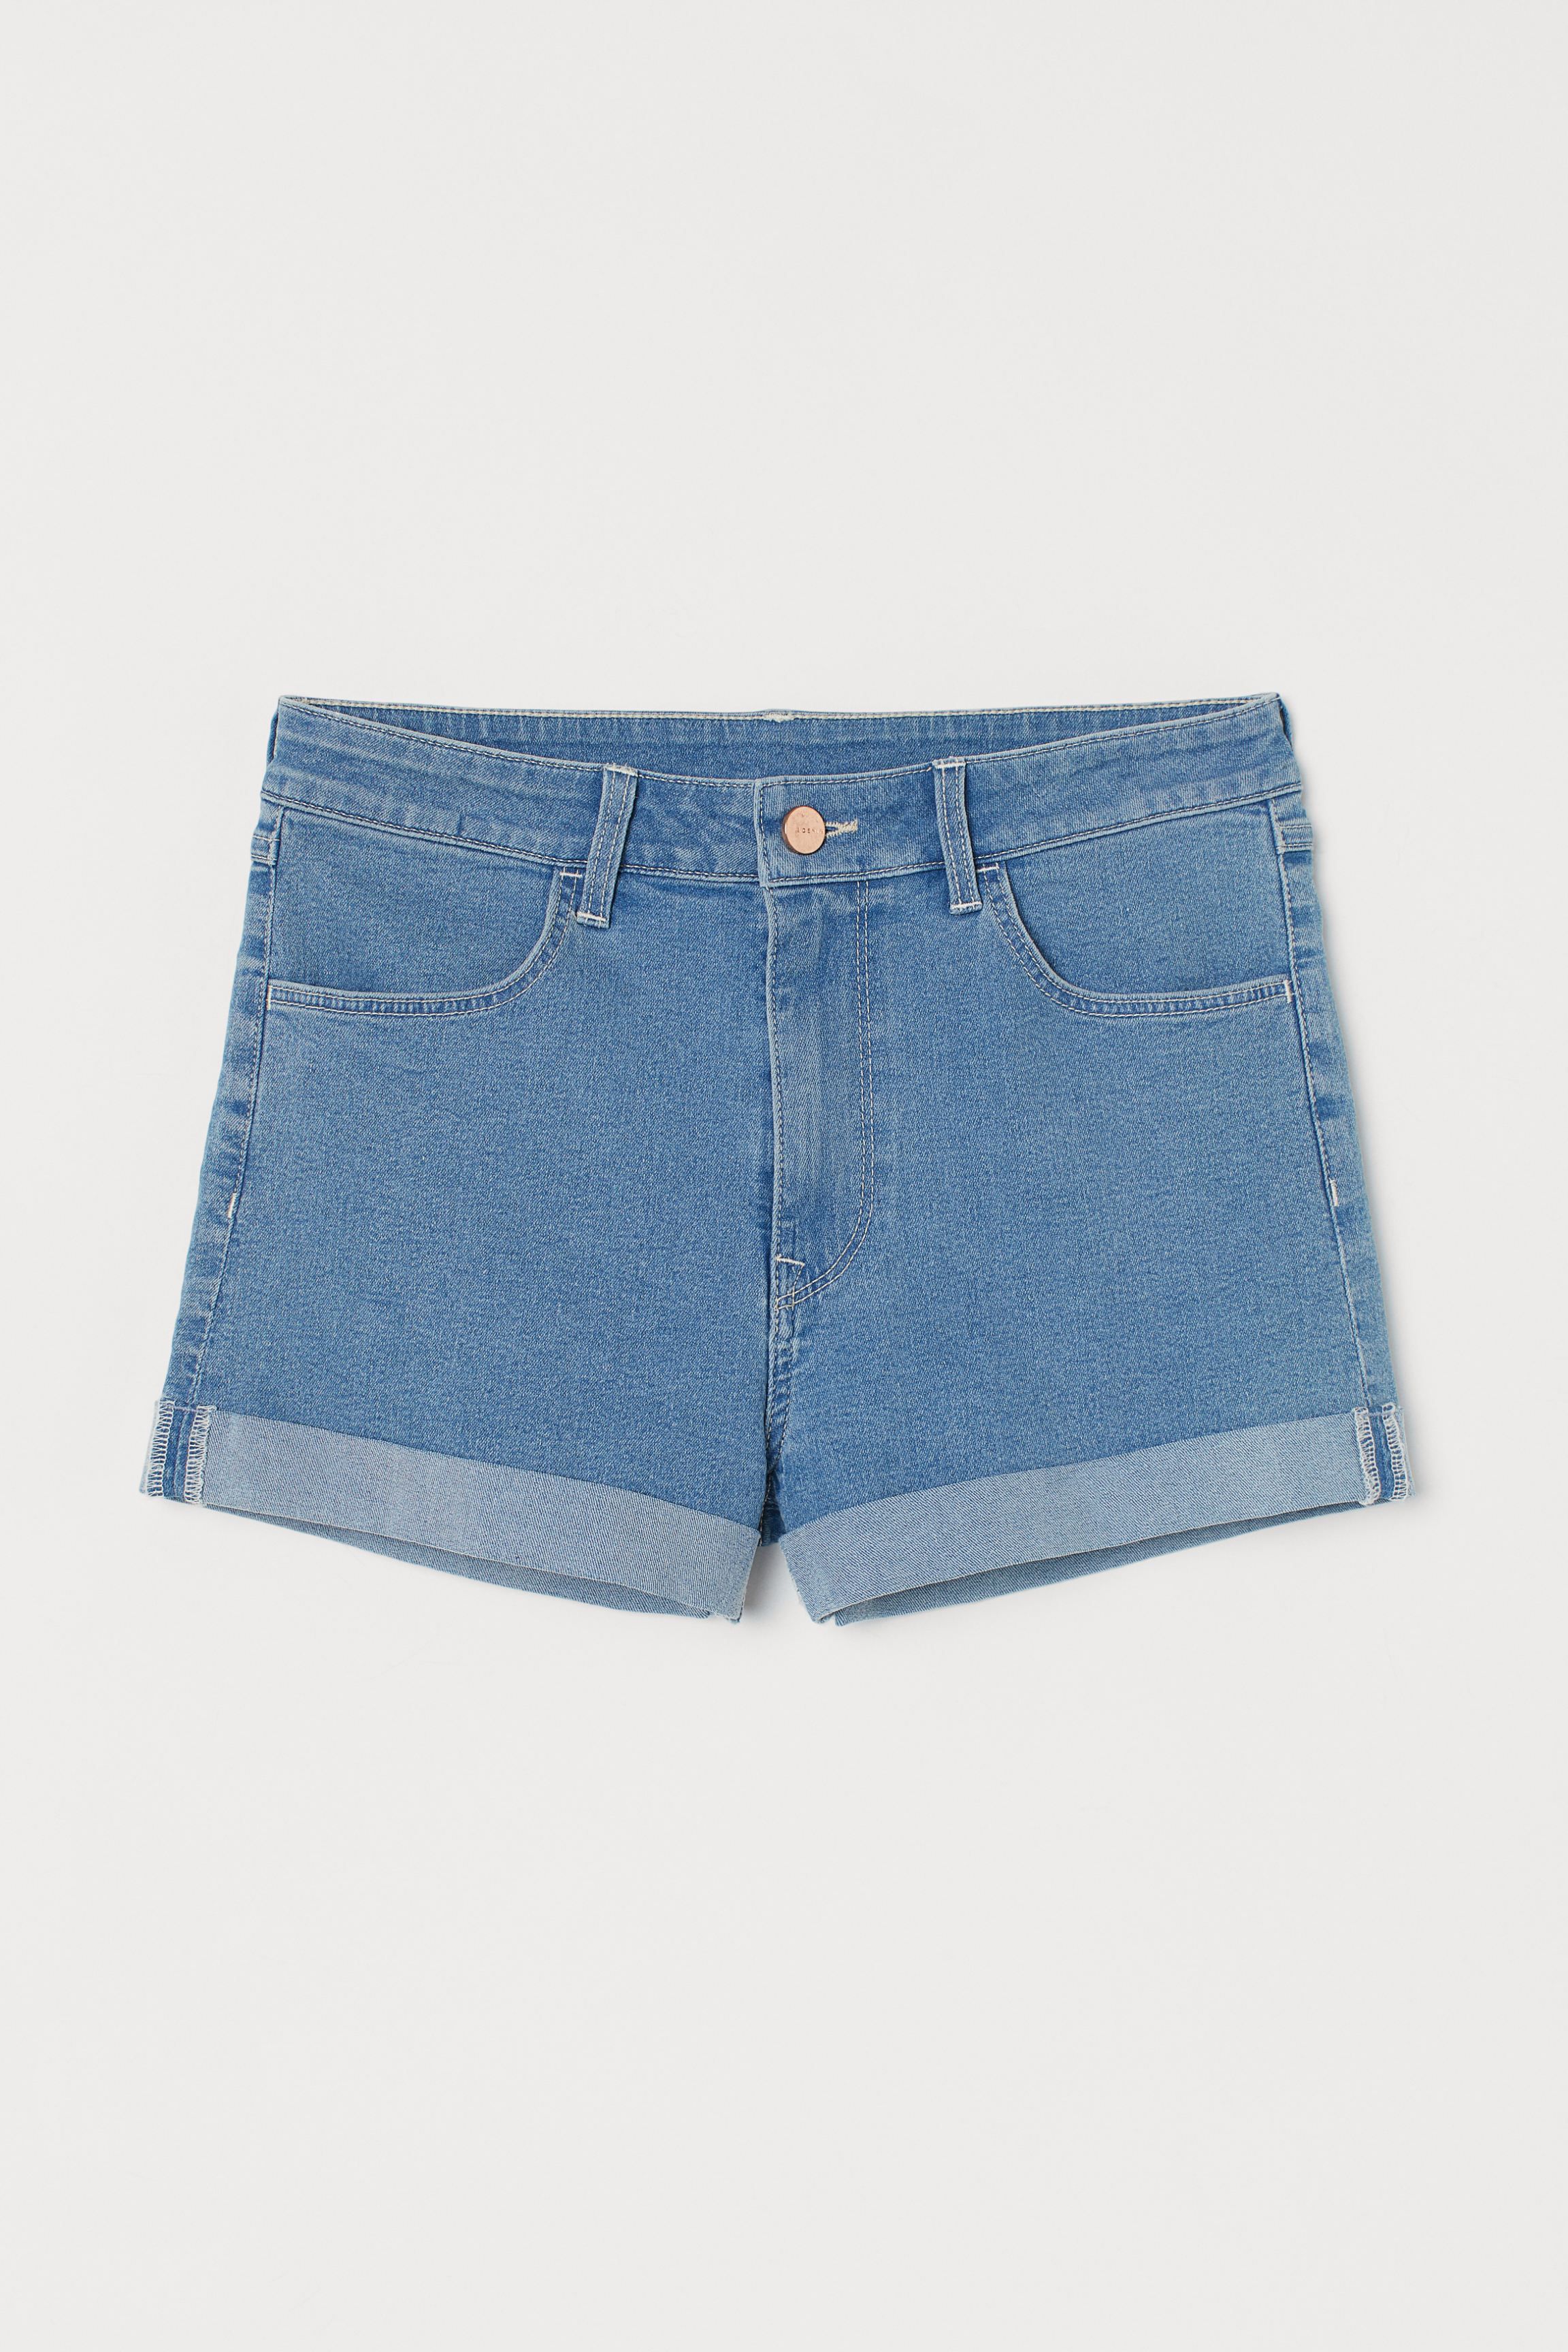 loose fit jean shorts womens